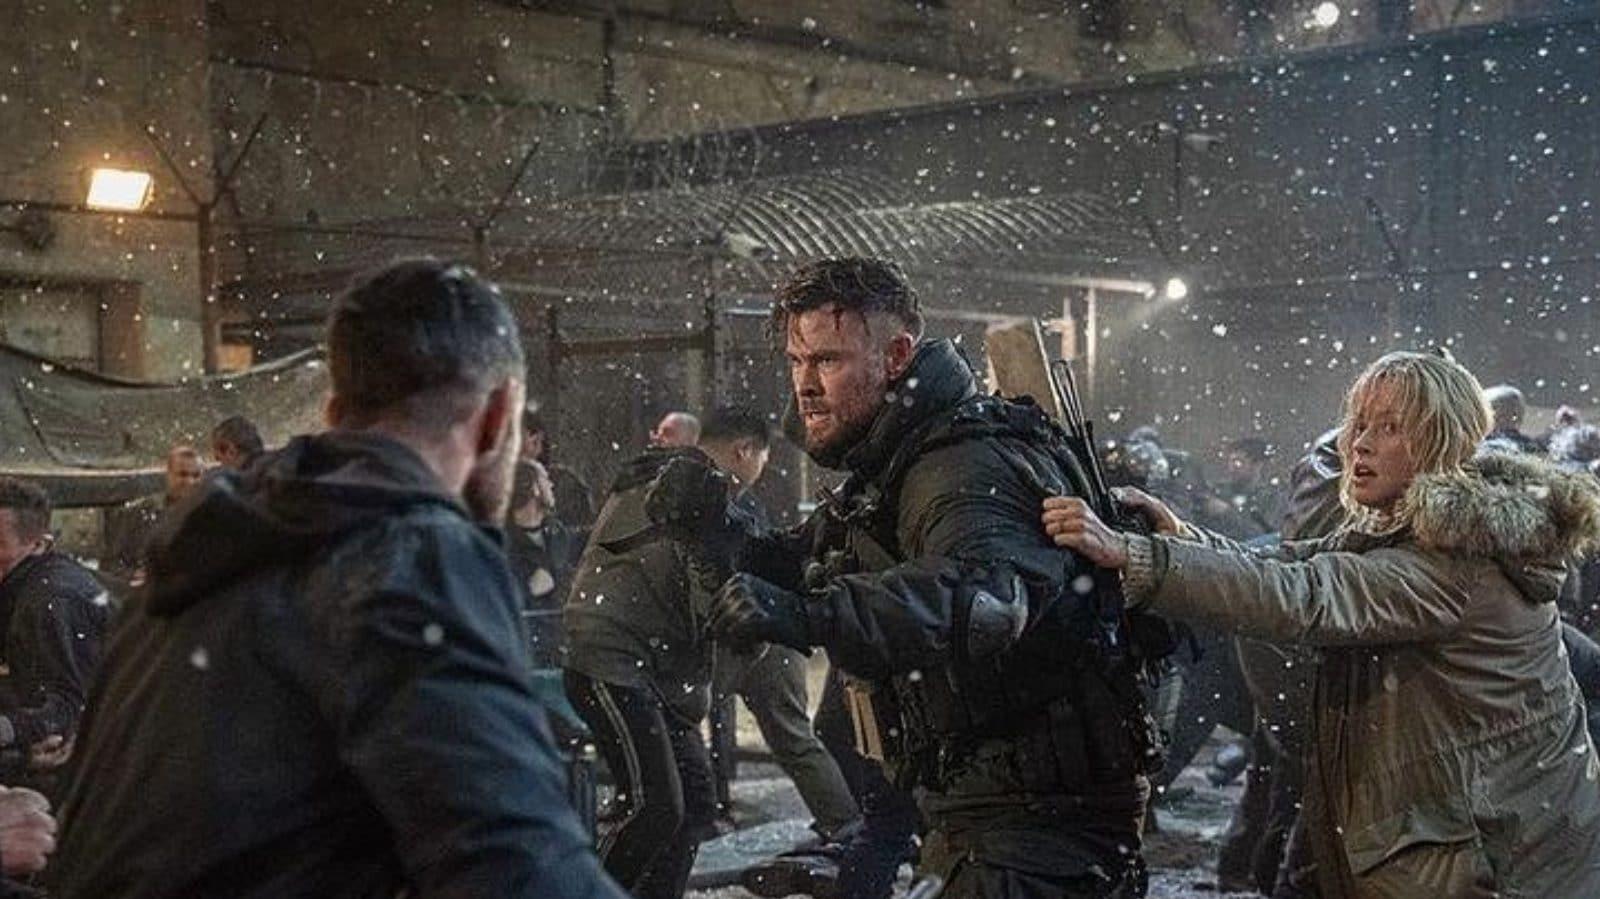 Extraction Chris Hemsworth Shares First Look Announces Film To